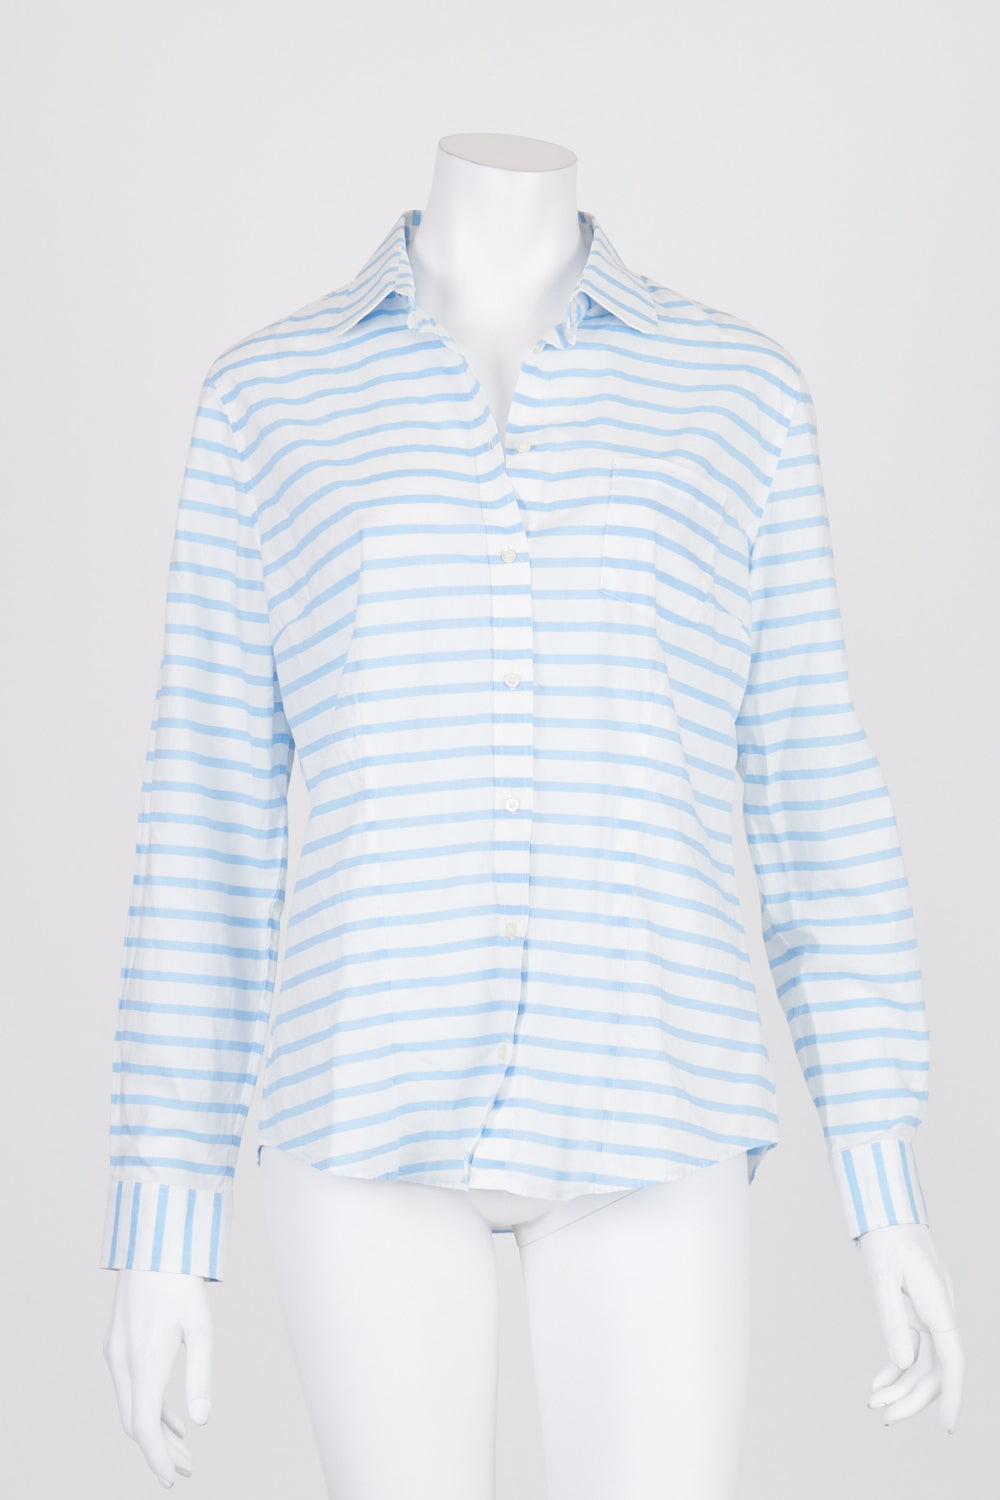 R.M. Williams Blue And White Striped Semi Fitted Shirt 12